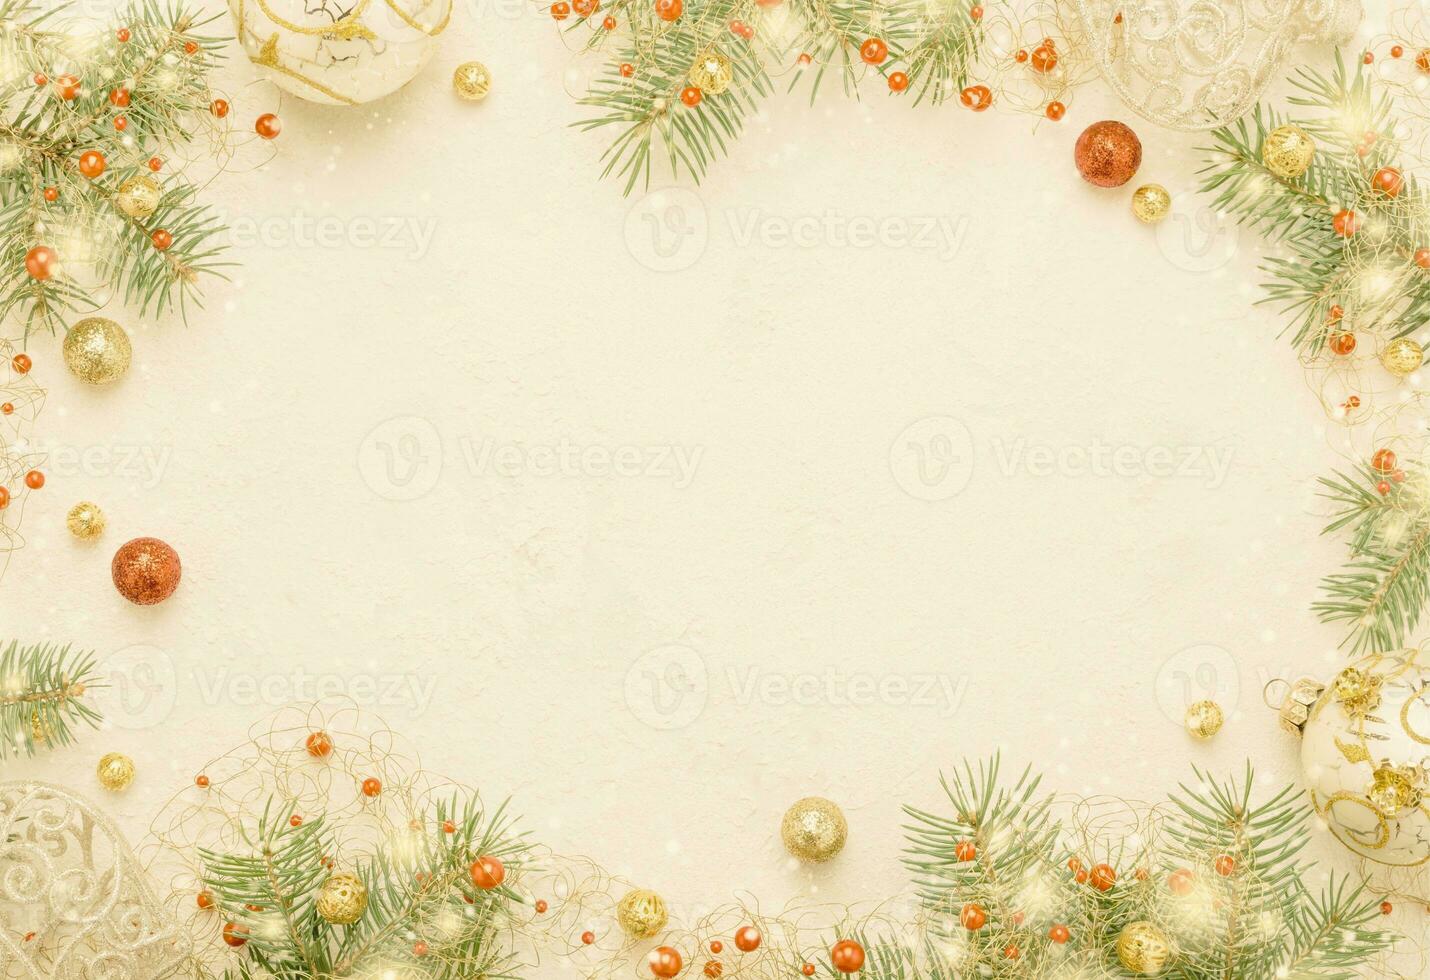 Christmas, Christmas Eve, Christmas Tree, Christmas Lights, Christmas Gift, Christmas Background, Christmas Atmosphere, Christmas Ornaments, Merry Christmas, Snowing Snowflakes photo